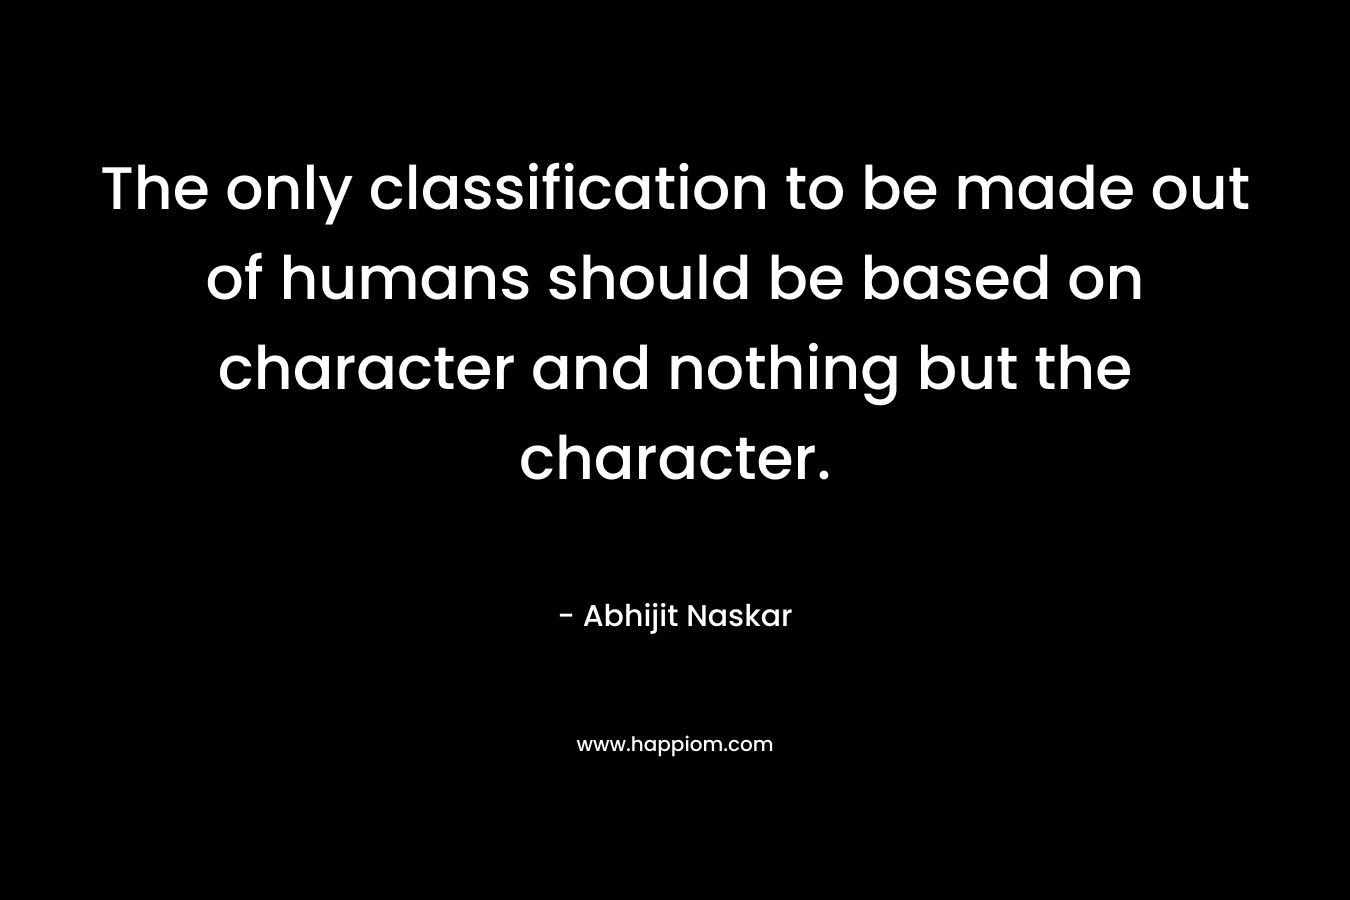 The only classification to be made out of humans should be based on character and nothing but the character.